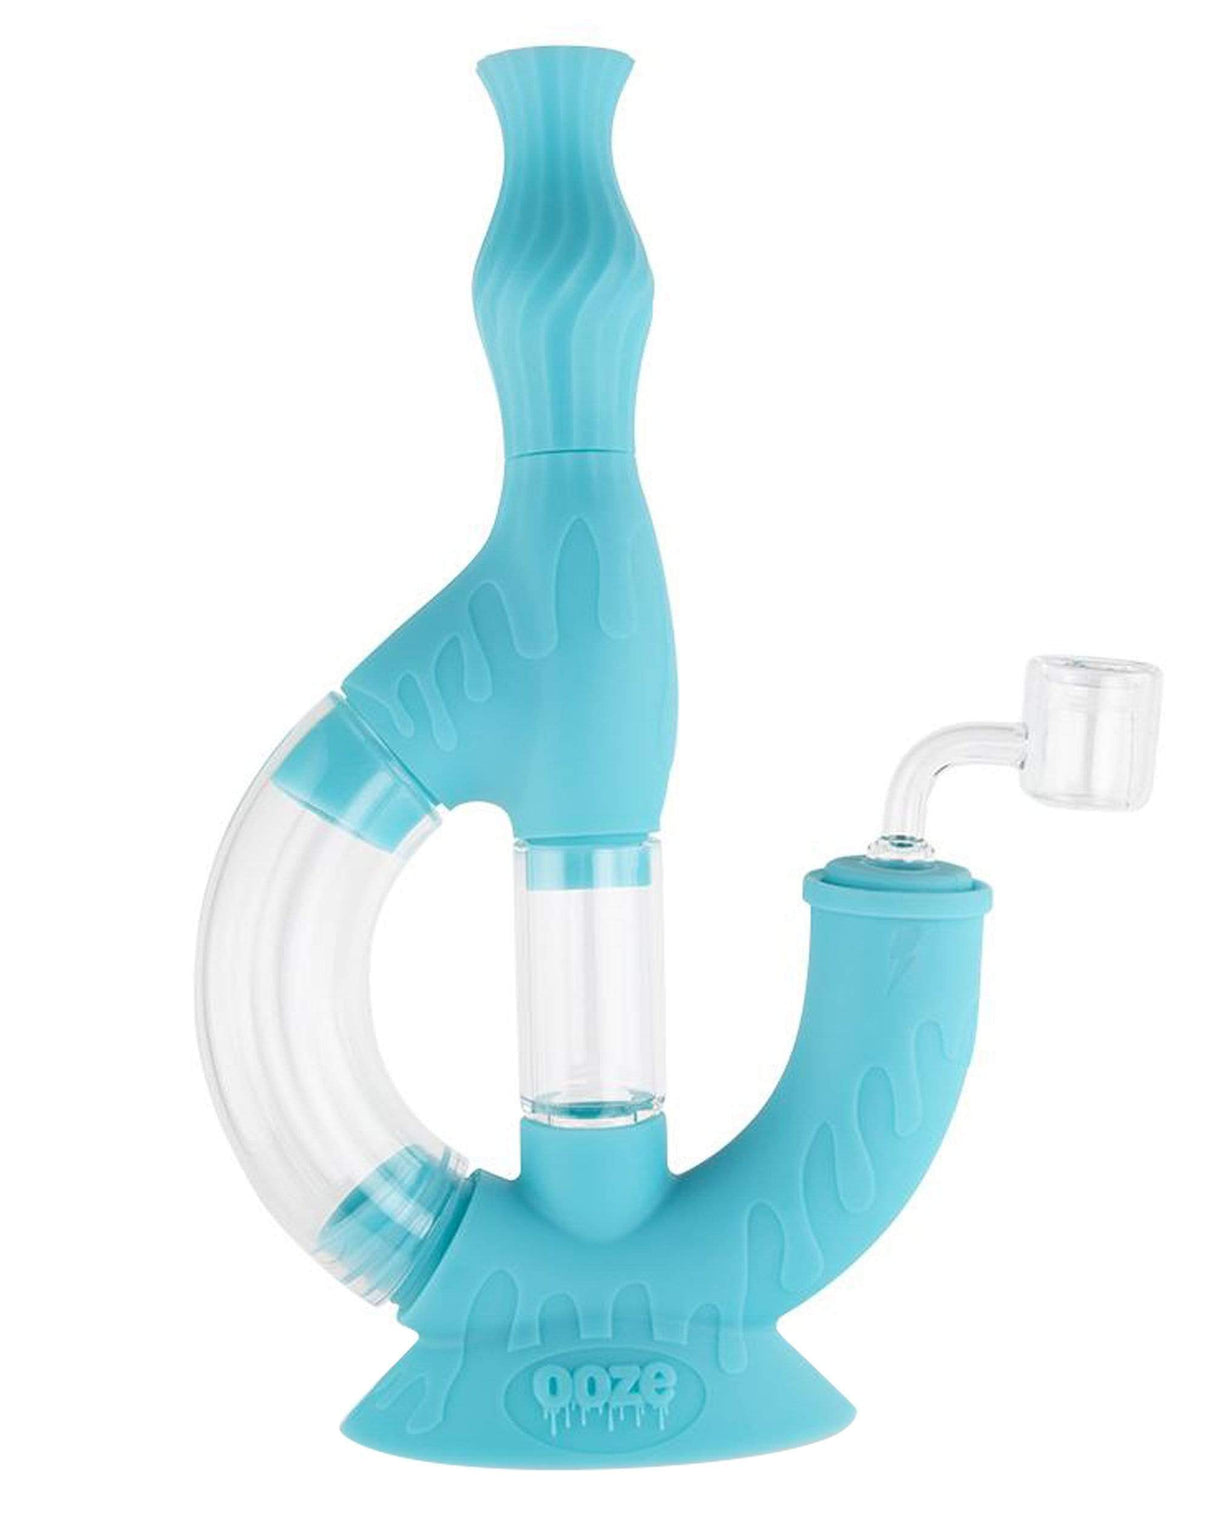 Ooze Echo 4-in-1 Silicone Bong in Teal, 9" with Slitted Percolator, Front View